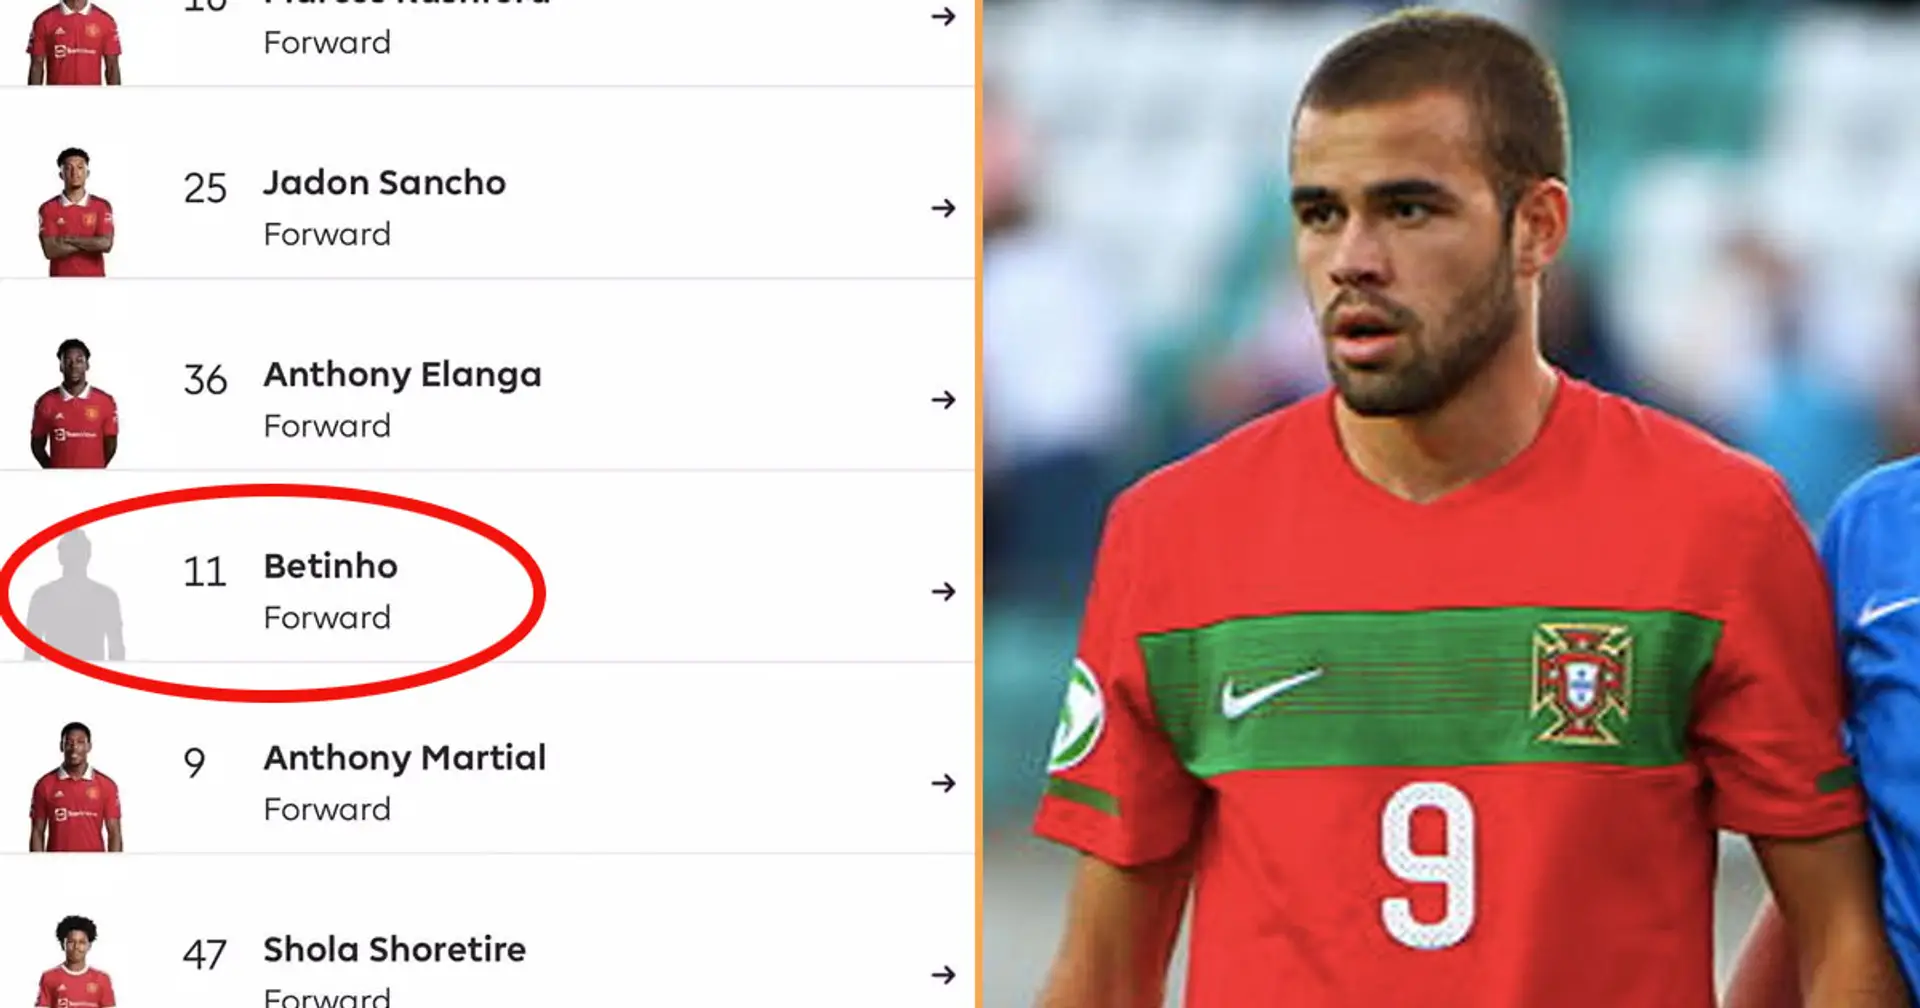 The guy who never played for Man United and still was listed as their senior player: who is Betinho?